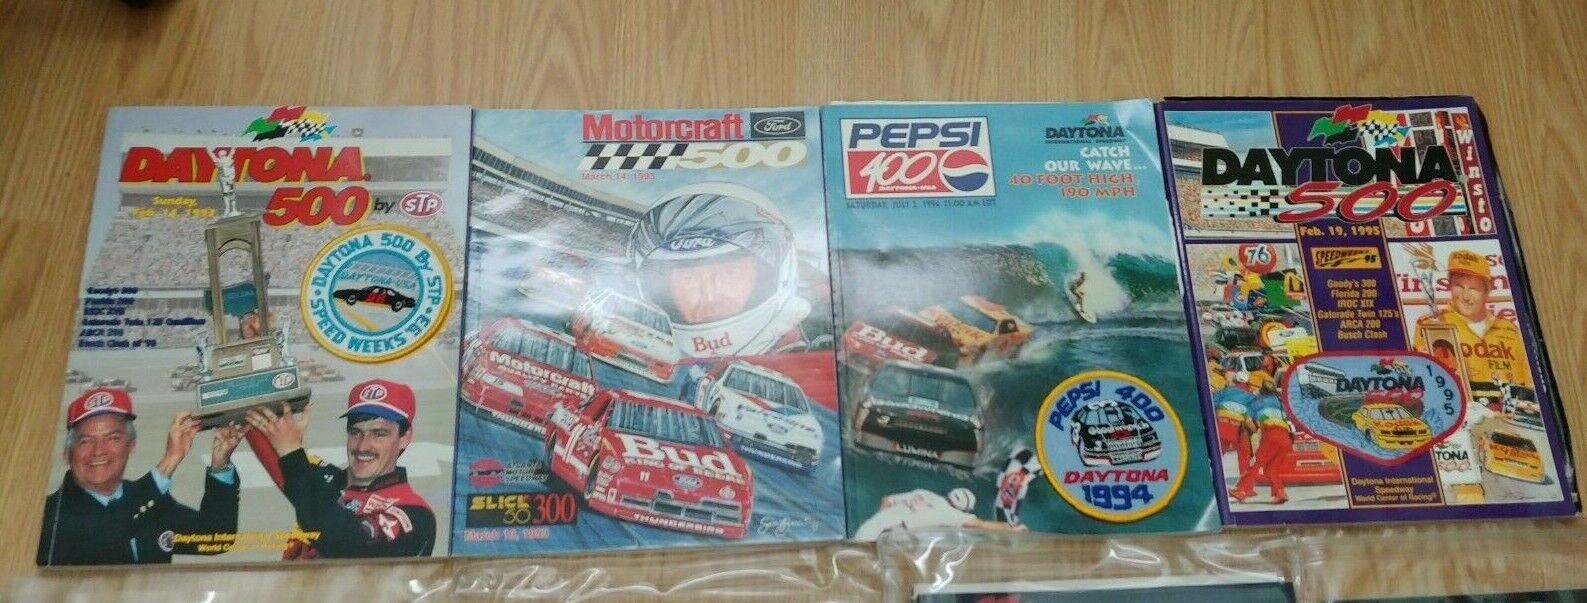 Lot of (10) NASCAR Race Programs (3 with patches and 6 with plastic sleeves) Без бренда - фотография #3